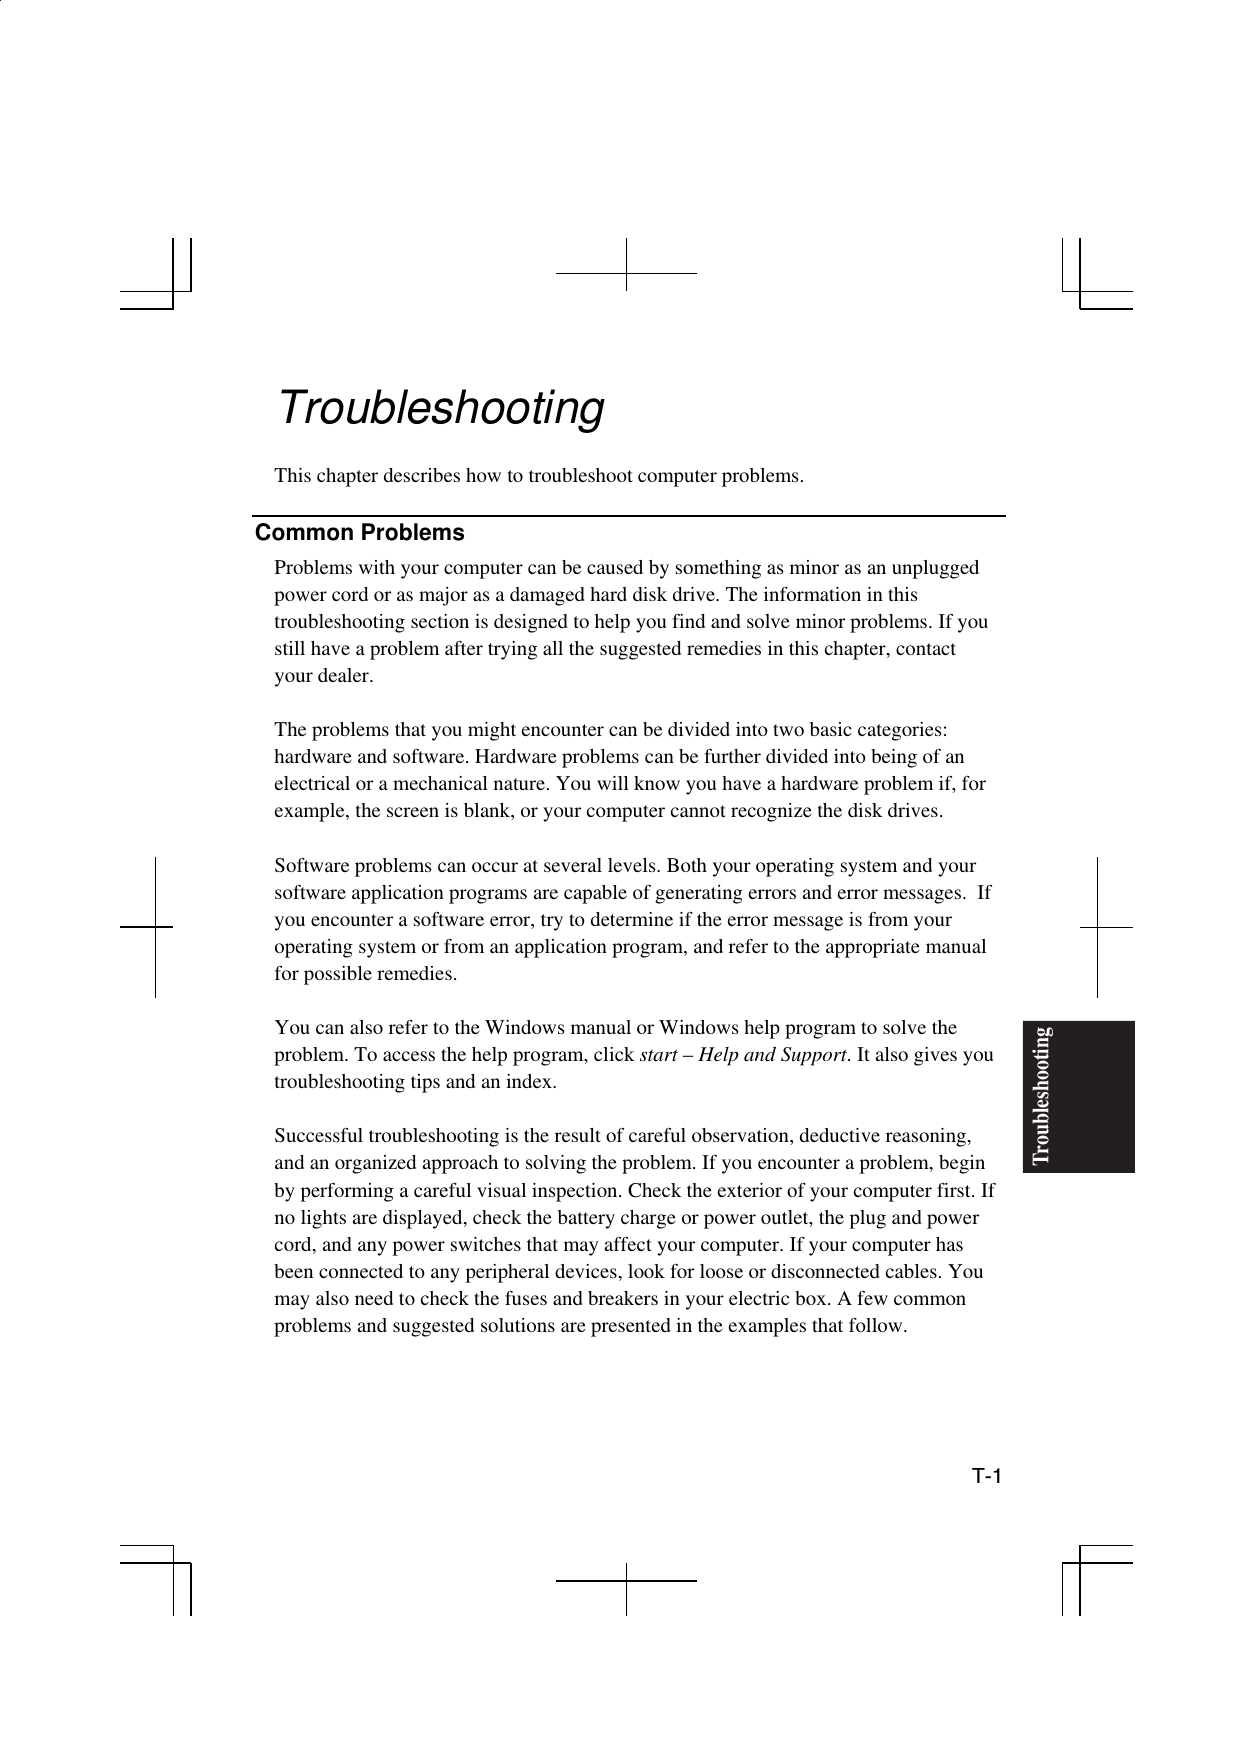  T-1 Troubleshooting Troubleshooting  This chapter describes how to troubleshoot computer problems.  Common Problems Problems with your computer can be caused by something as minor as an unplugged power cord or as major as a damaged hard disk drive. The information in this troubleshooting section is designed to help you find and solve minor problems. If you still have a problem after trying all the suggested remedies in this chapter, contact your dealer.  The problems that you might encounter can be divided into two basic categories: hardware and software. Hardware problems can be further divided into being of an electrical or a mechanical nature. You will know you have a hardware problem if, for example, the screen is blank, or your computer cannot recognize the disk drives.  Software problems can occur at several levels. Both your operating system and your software application programs are capable of generating errors and error messages.  If you encounter a software error, try to determine if the error message is from your operating system or from an application program, and refer to the appropriate manual for possible remedies.  You can also refer to the Windows manual or Windows help program to solve the problem. To access the help program, click start – Help and Support. It also gives you troubleshooting tips and an index.  Successful troubleshooting is the result of careful observation, deductive reasoning, and an organized approach to solving the problem. If you encounter a problem, begin by performing a careful visual inspection. Check the exterior of your computer first. If no lights are displayed, check the battery charge or power outlet, the plug and power cord, and any power switches that may affect your computer. If your computer has been connected to any peripheral devices, look for loose or disconnected cables. You may also need to check the fuses and breakers in your electric box. A few common problems and suggested solutions are presented in the examples that follow.  